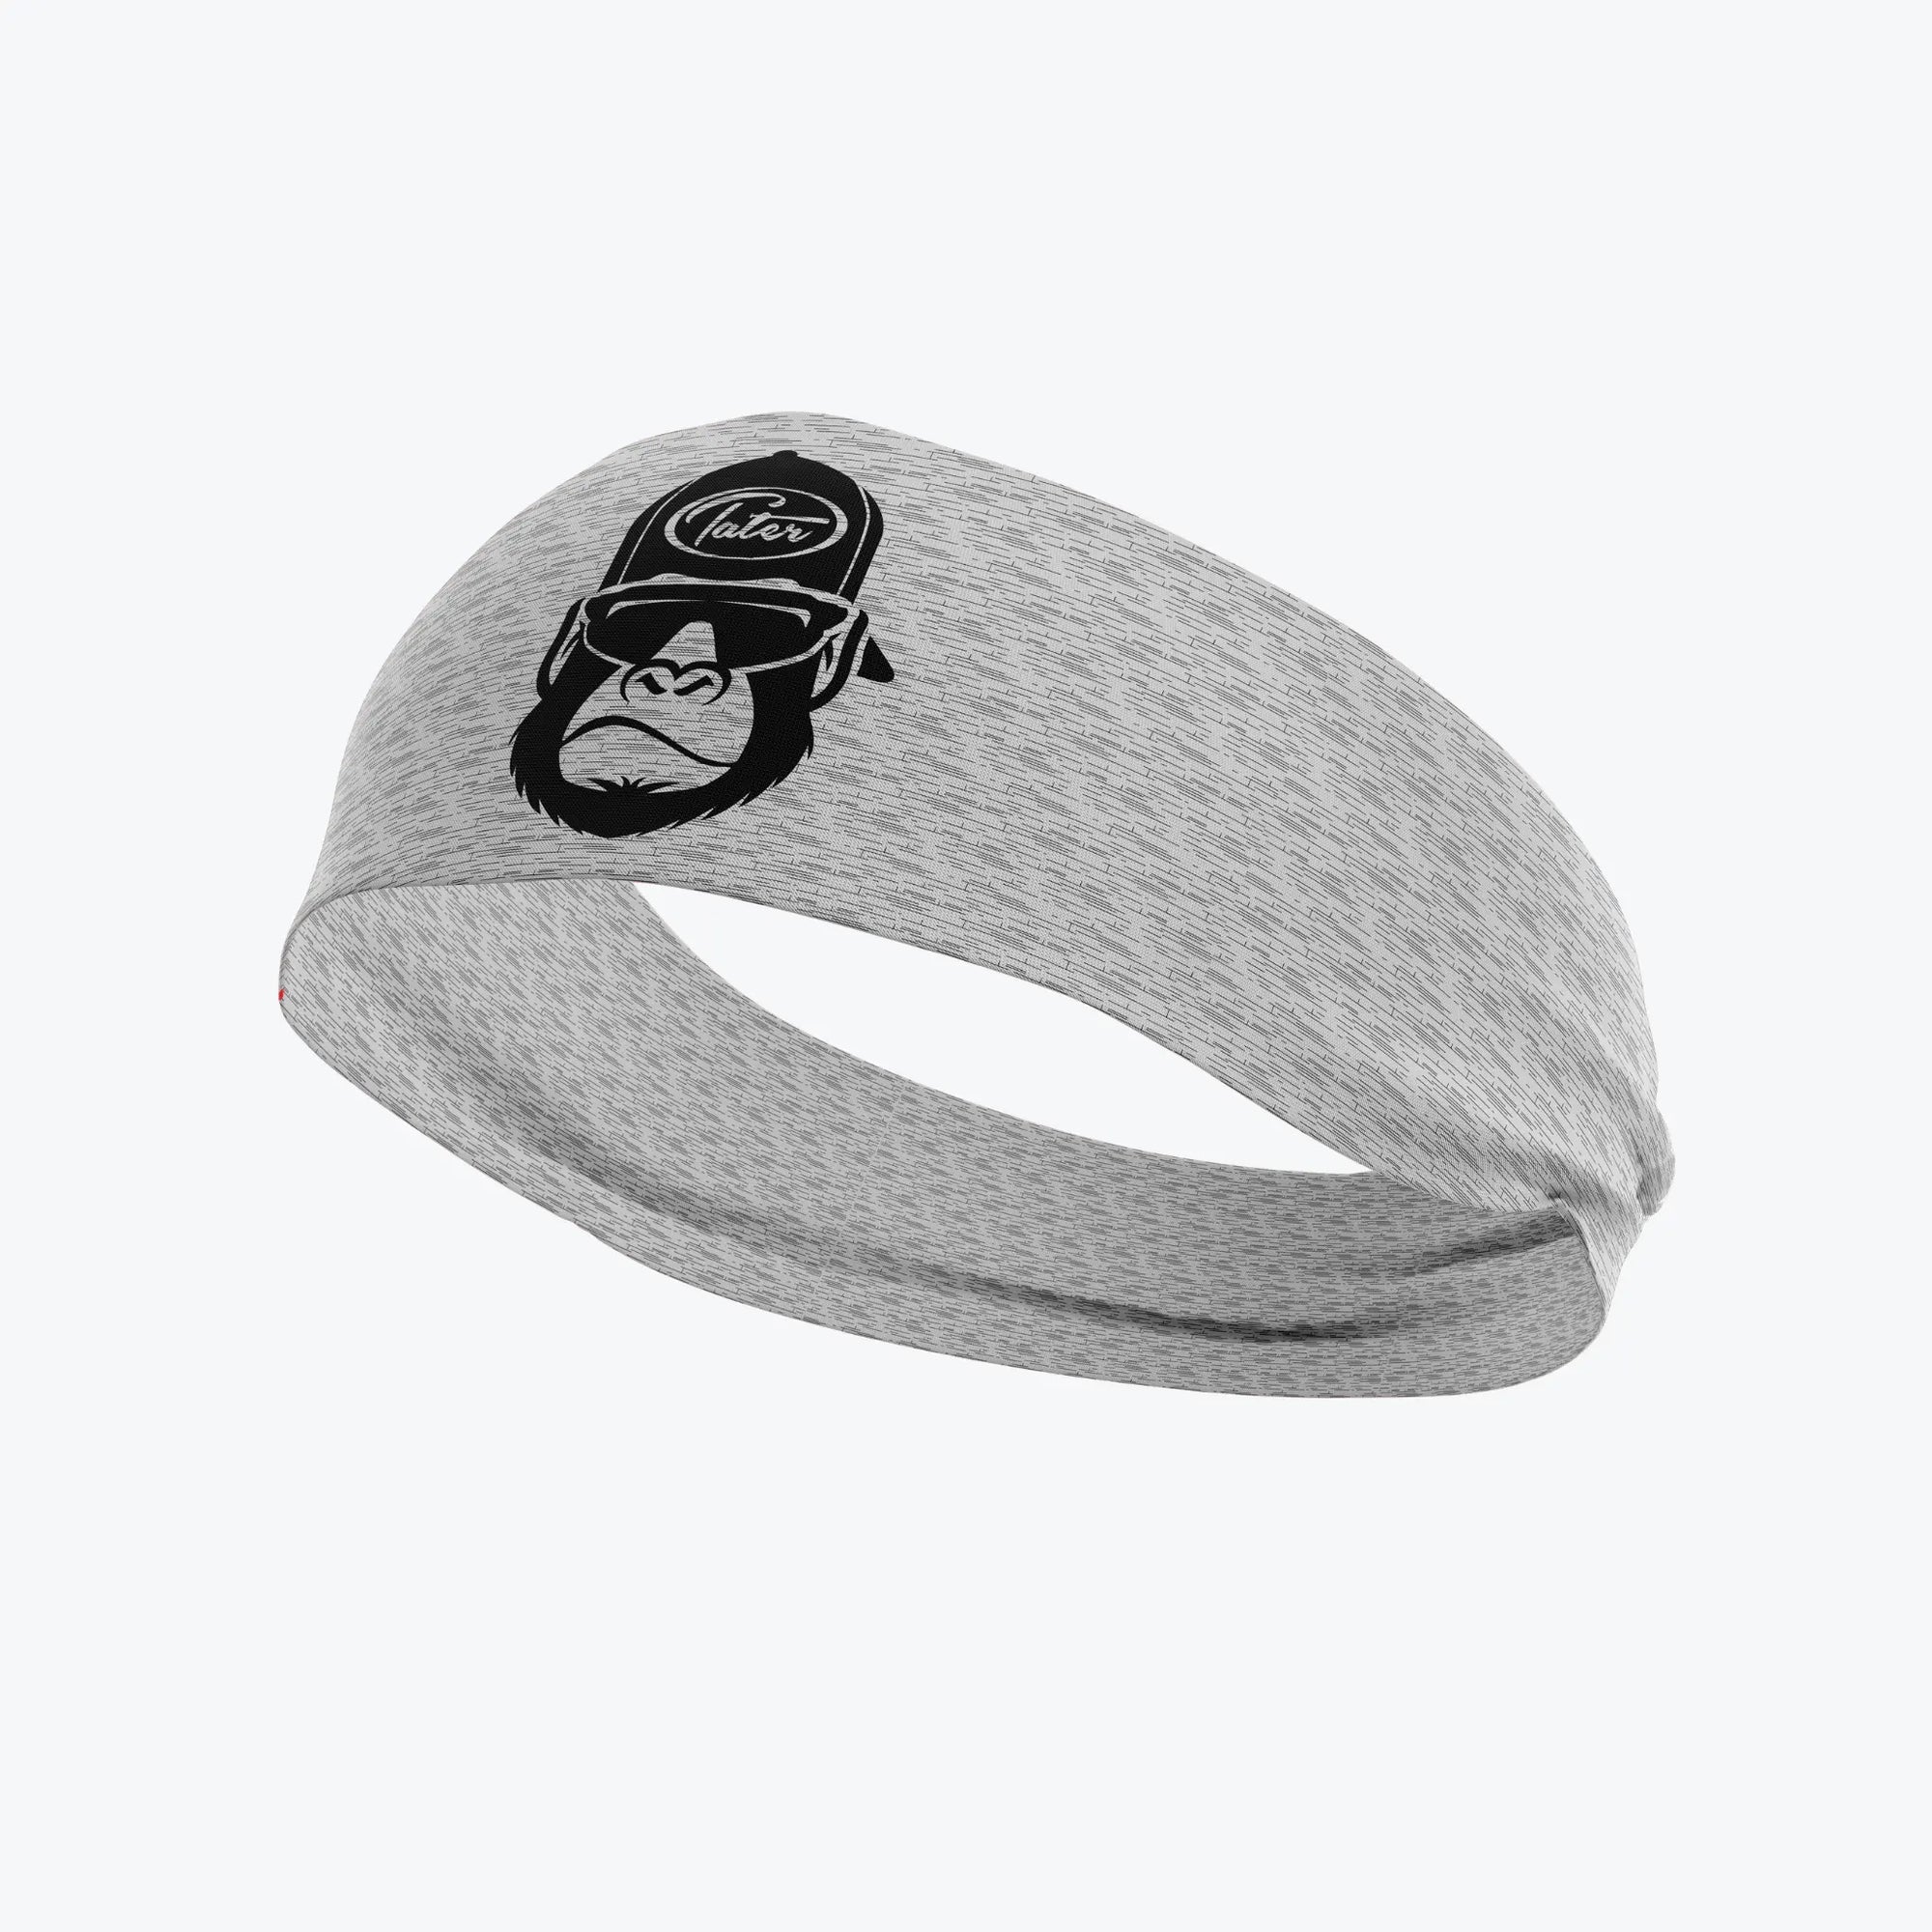 Grey Tater Kong baseball headband featuring the Tater Baseball gorilla logo, designed for athletes seeking a blend of comfort and style on and off the field.